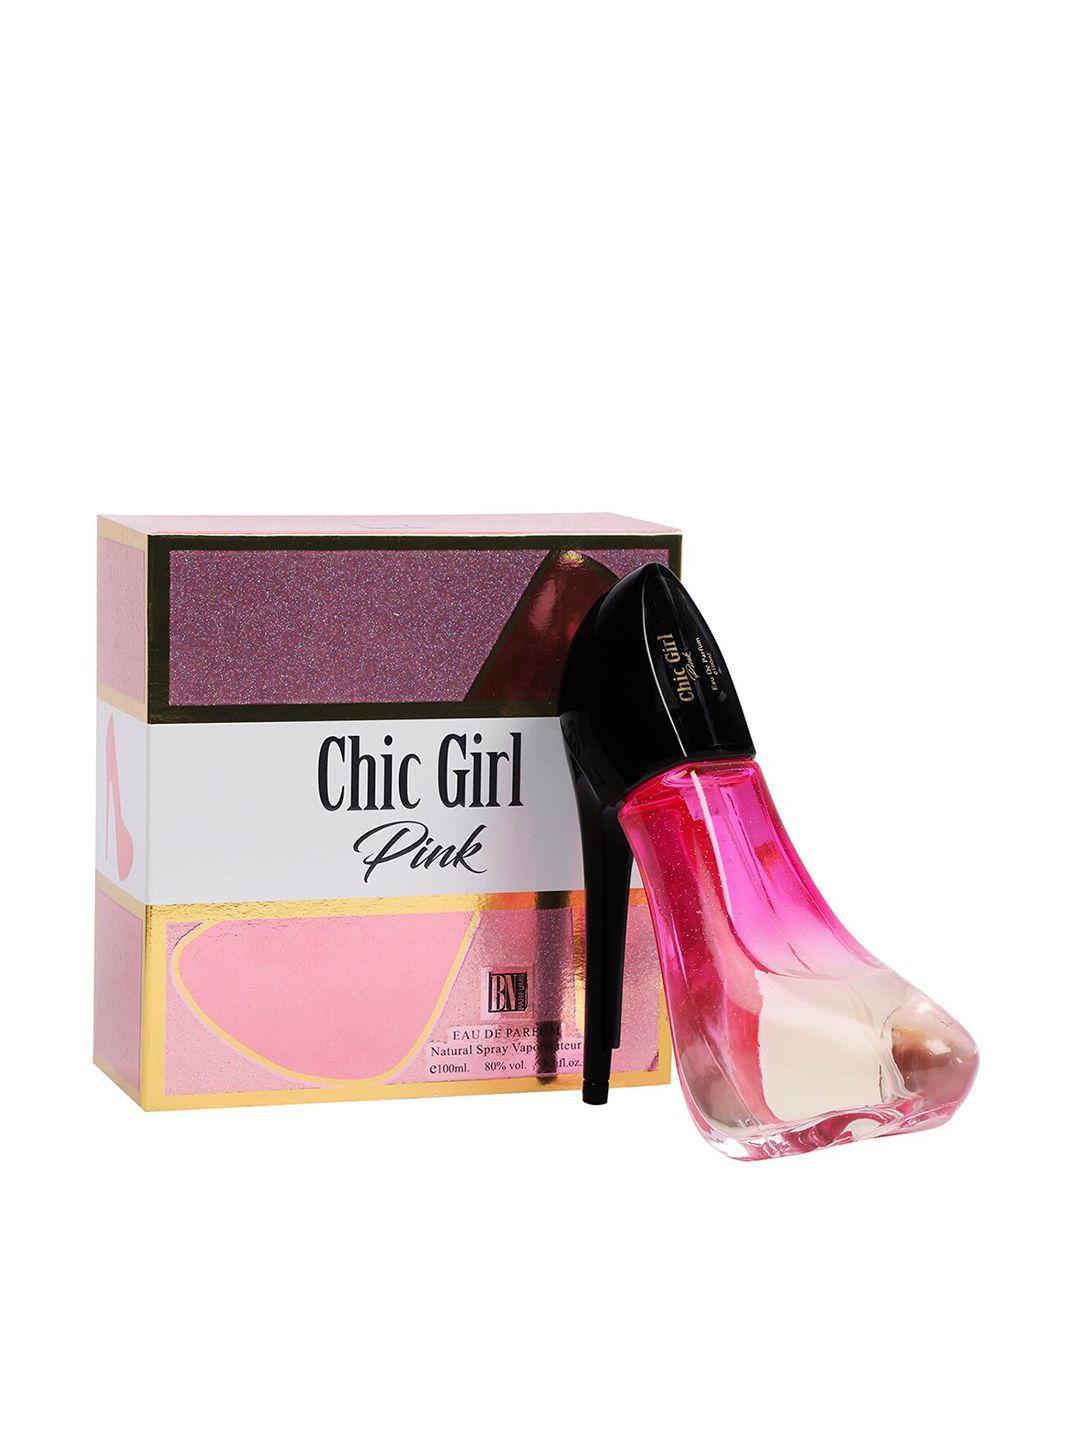 bn parfums women chic girl pink long-lasting eau de parfum with soothing fragrance - 100ml